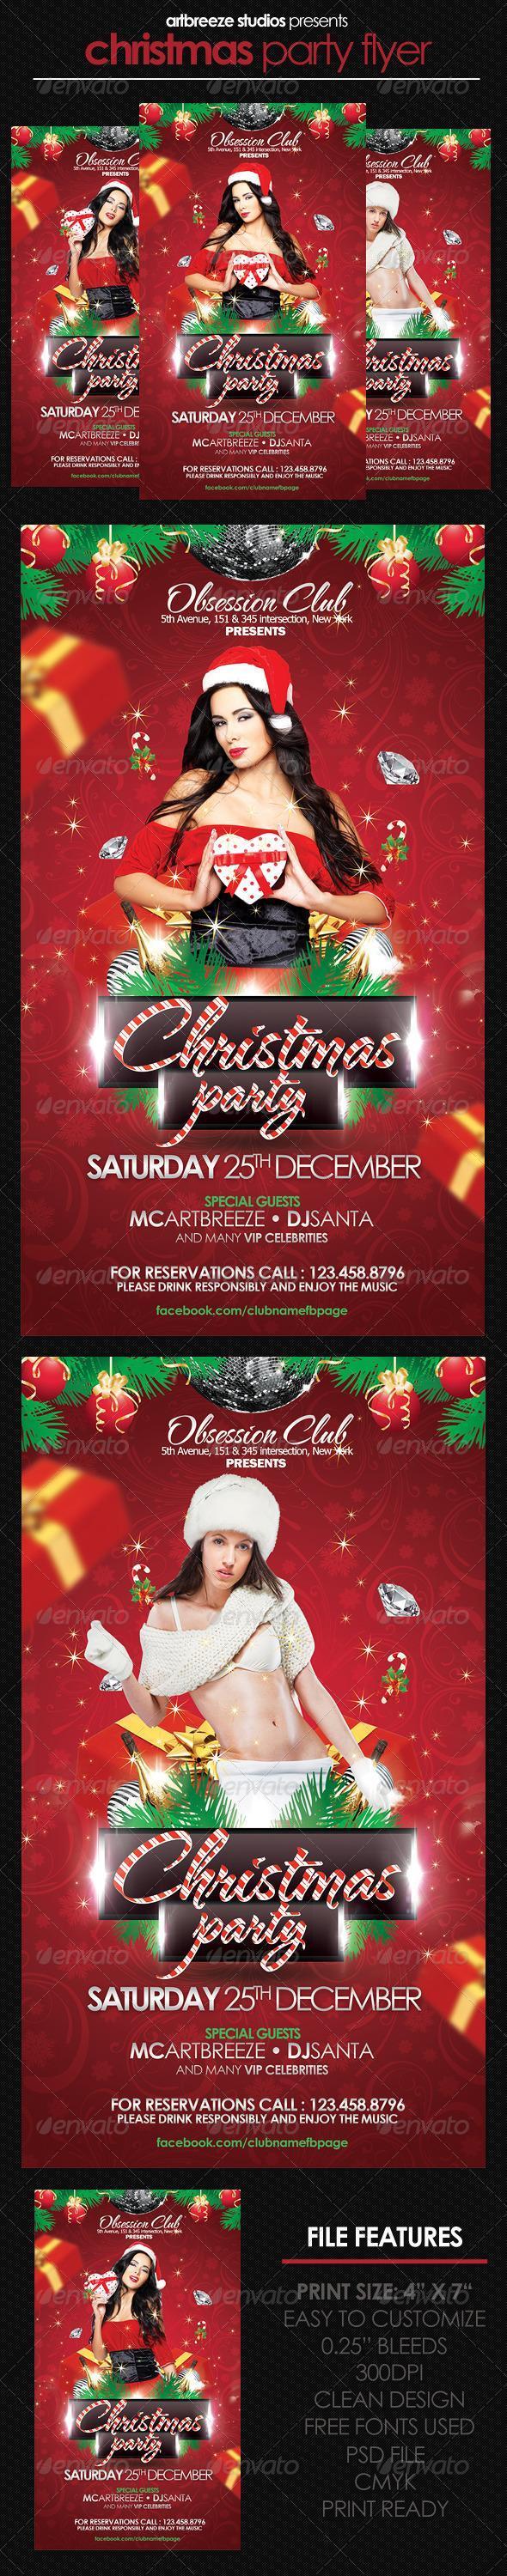 Christmas Flyer Template for Club Party